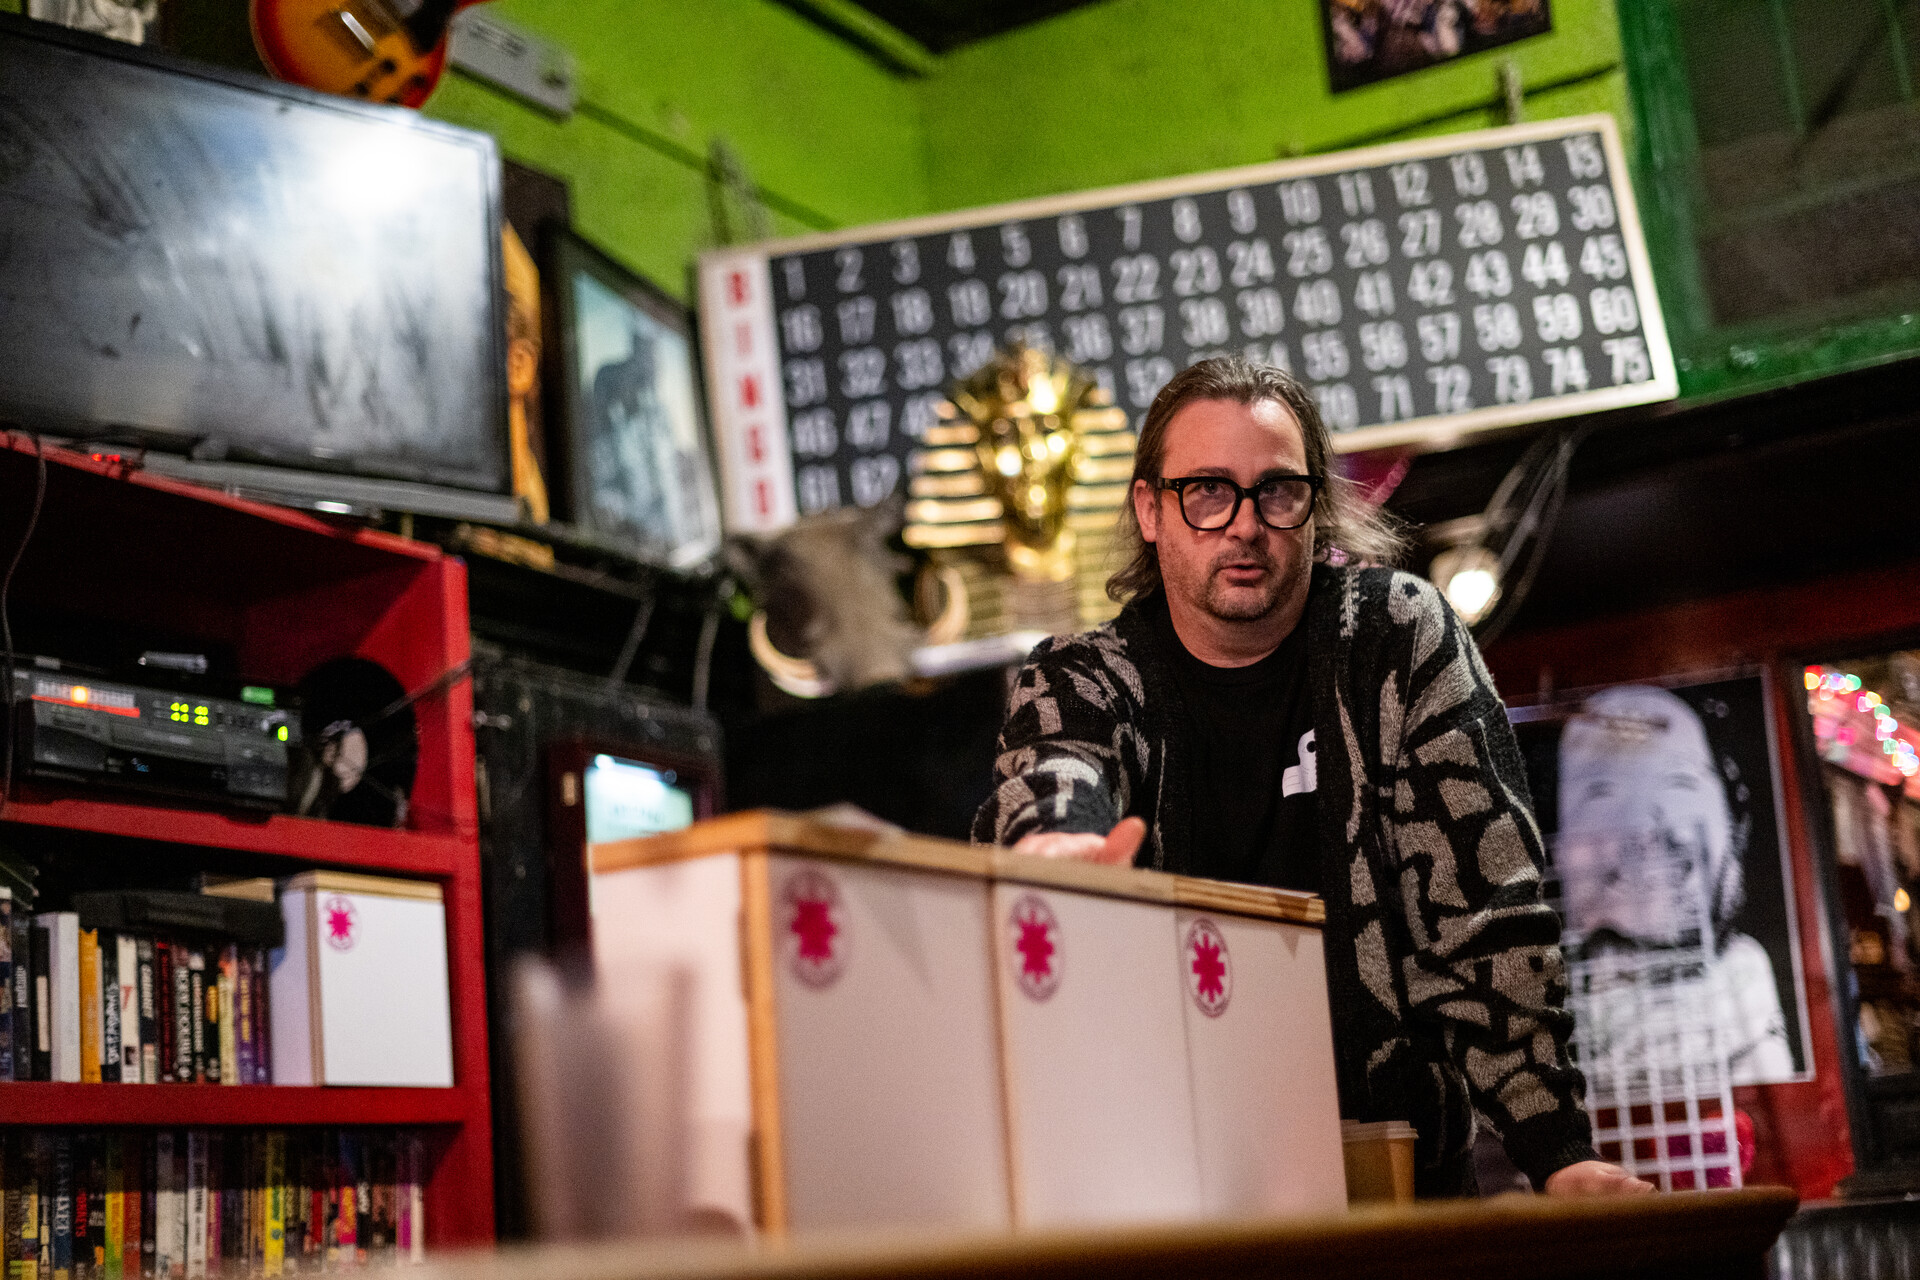 A white man with glasses looks at the camera as he gestures toward three white boxes with asterisk logos on them lined up next to each other in a bar.